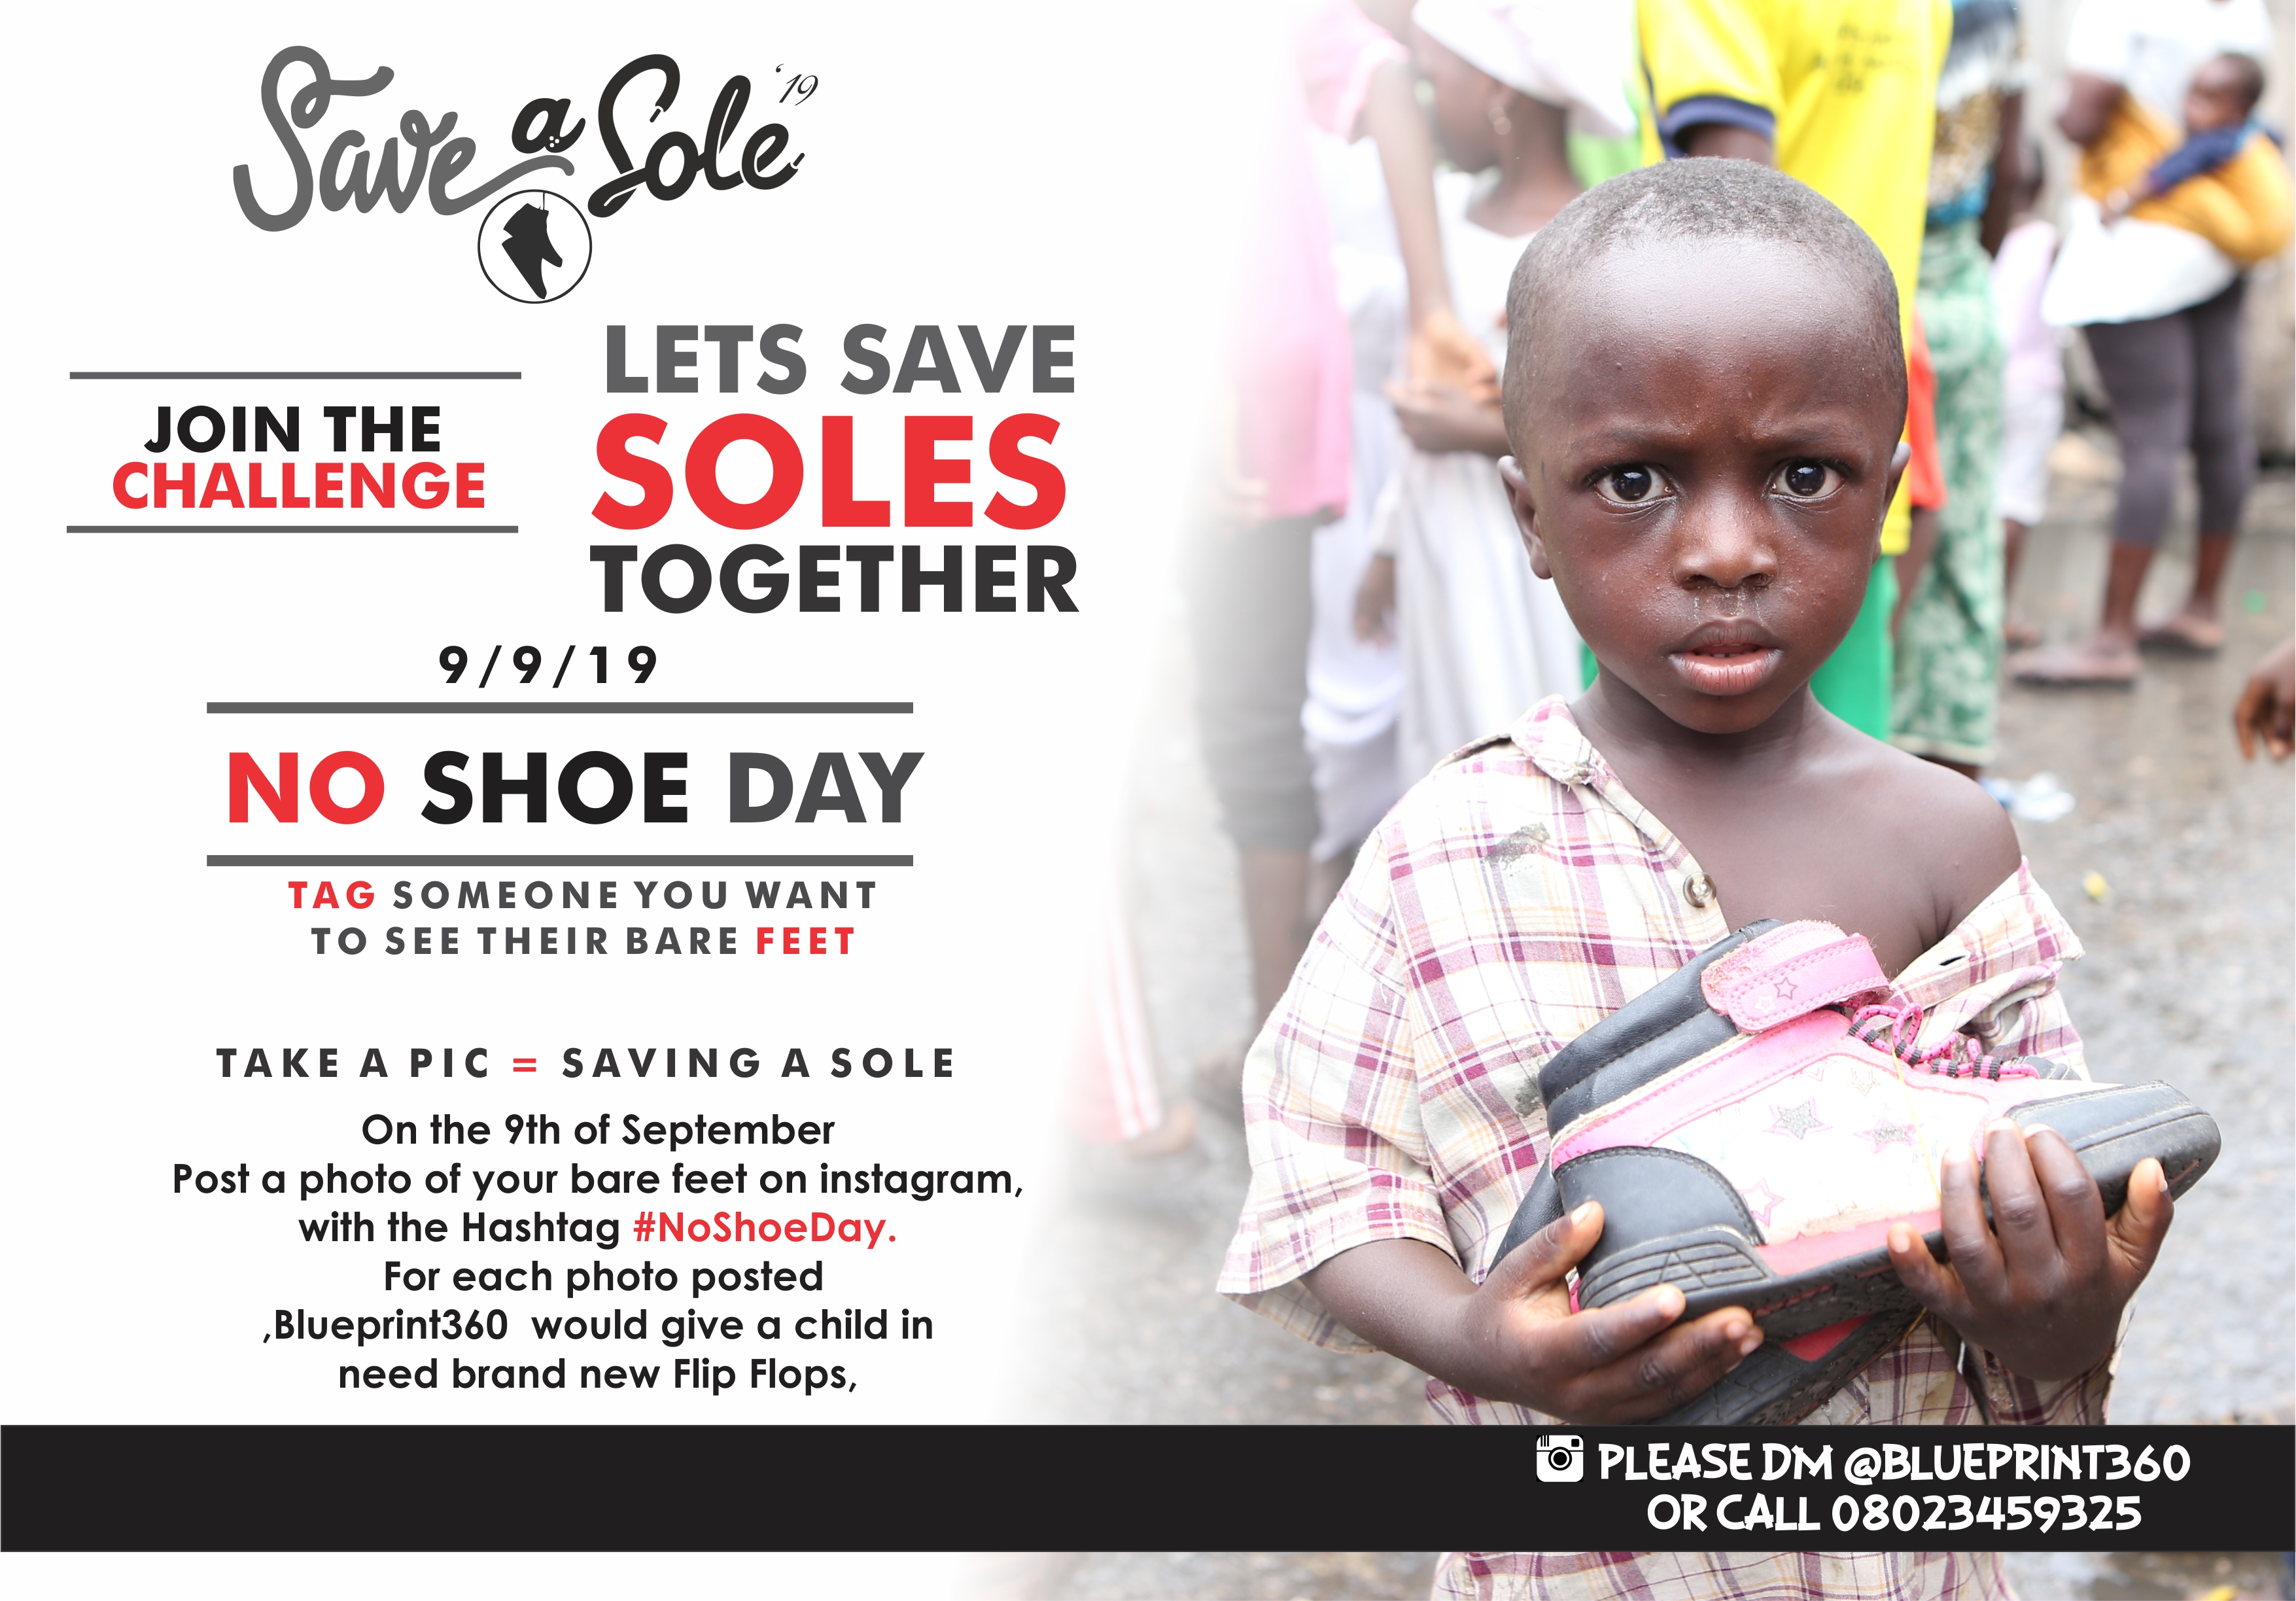 You can Put Shoes on A Child's Feet Today by Donating to the Blueprint  'Save A Sole' Project | BellaNaija